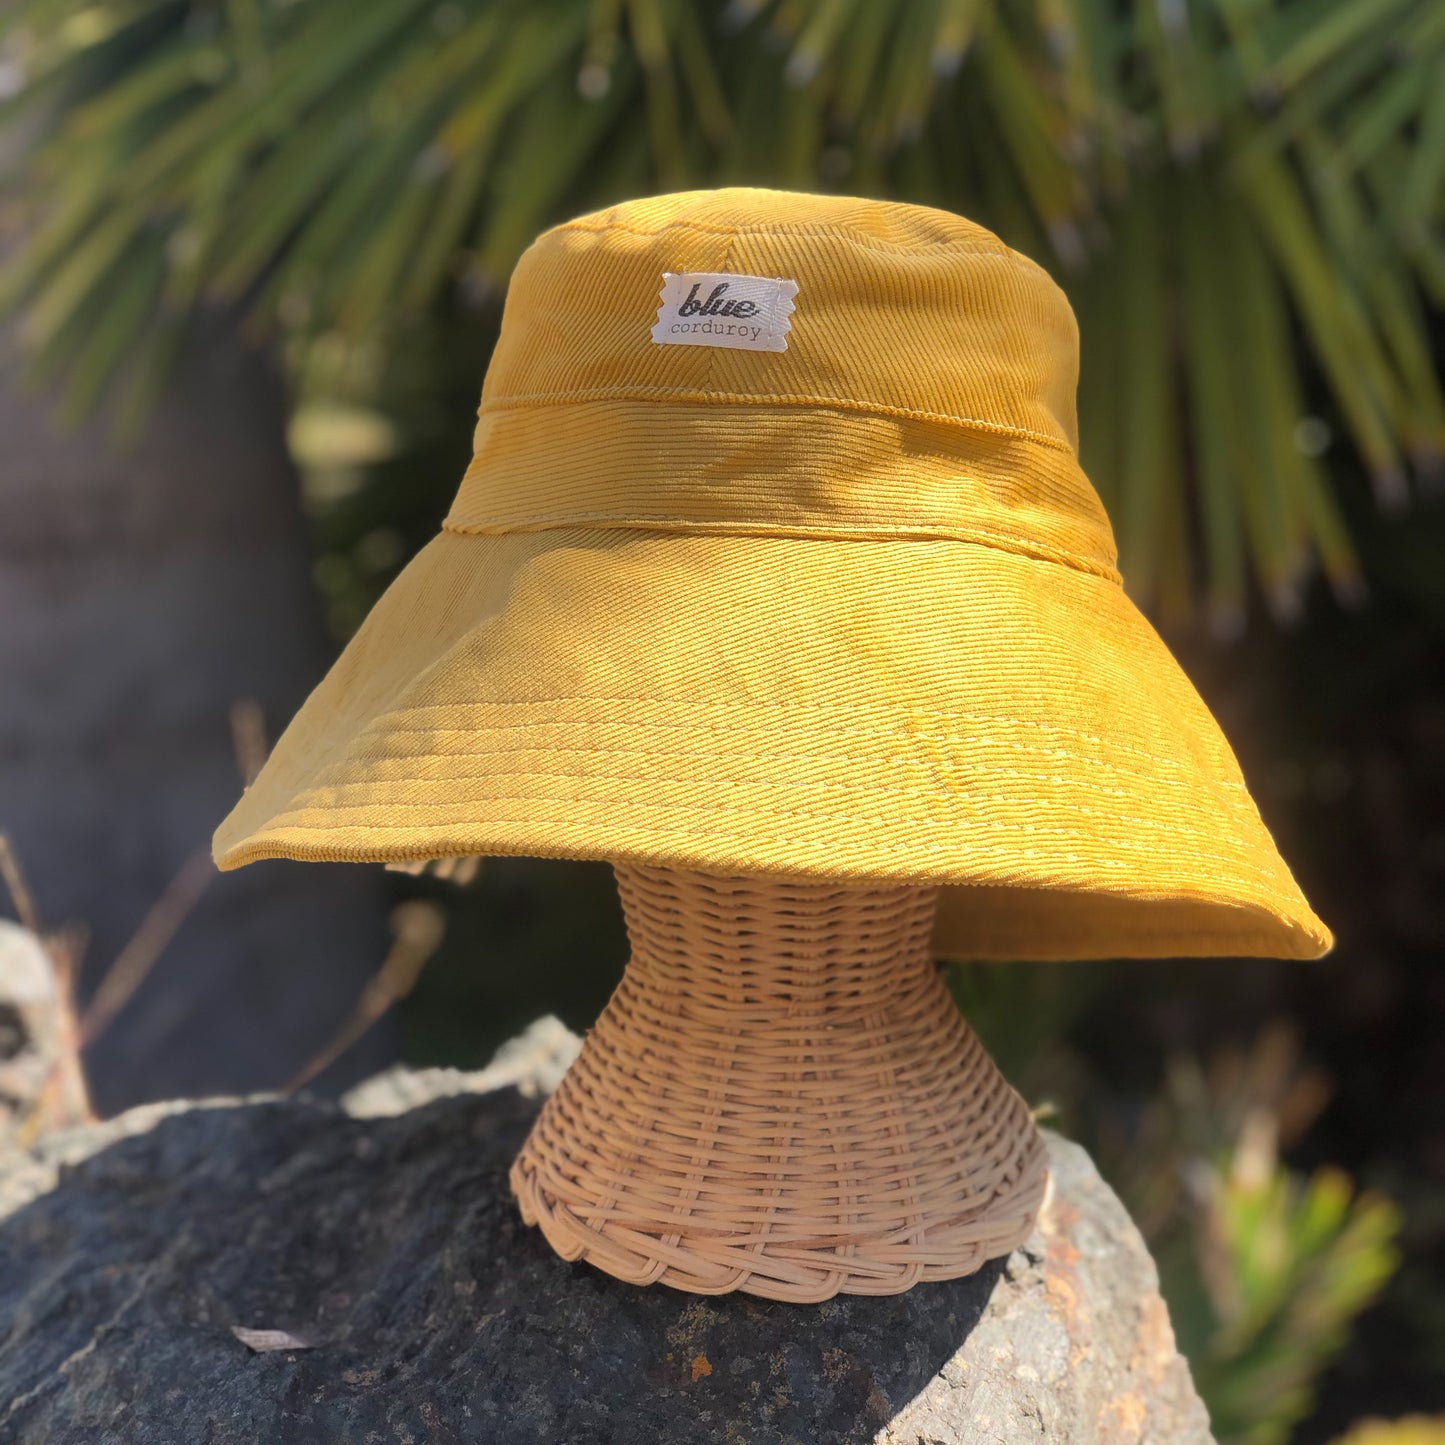 Yellow Wide Brim Bucket Hat, Corduroy Fabric Sun Hat, Boho Beach Hat, Packable Hat, Beach Style Gift for Her, Gardening Accessory